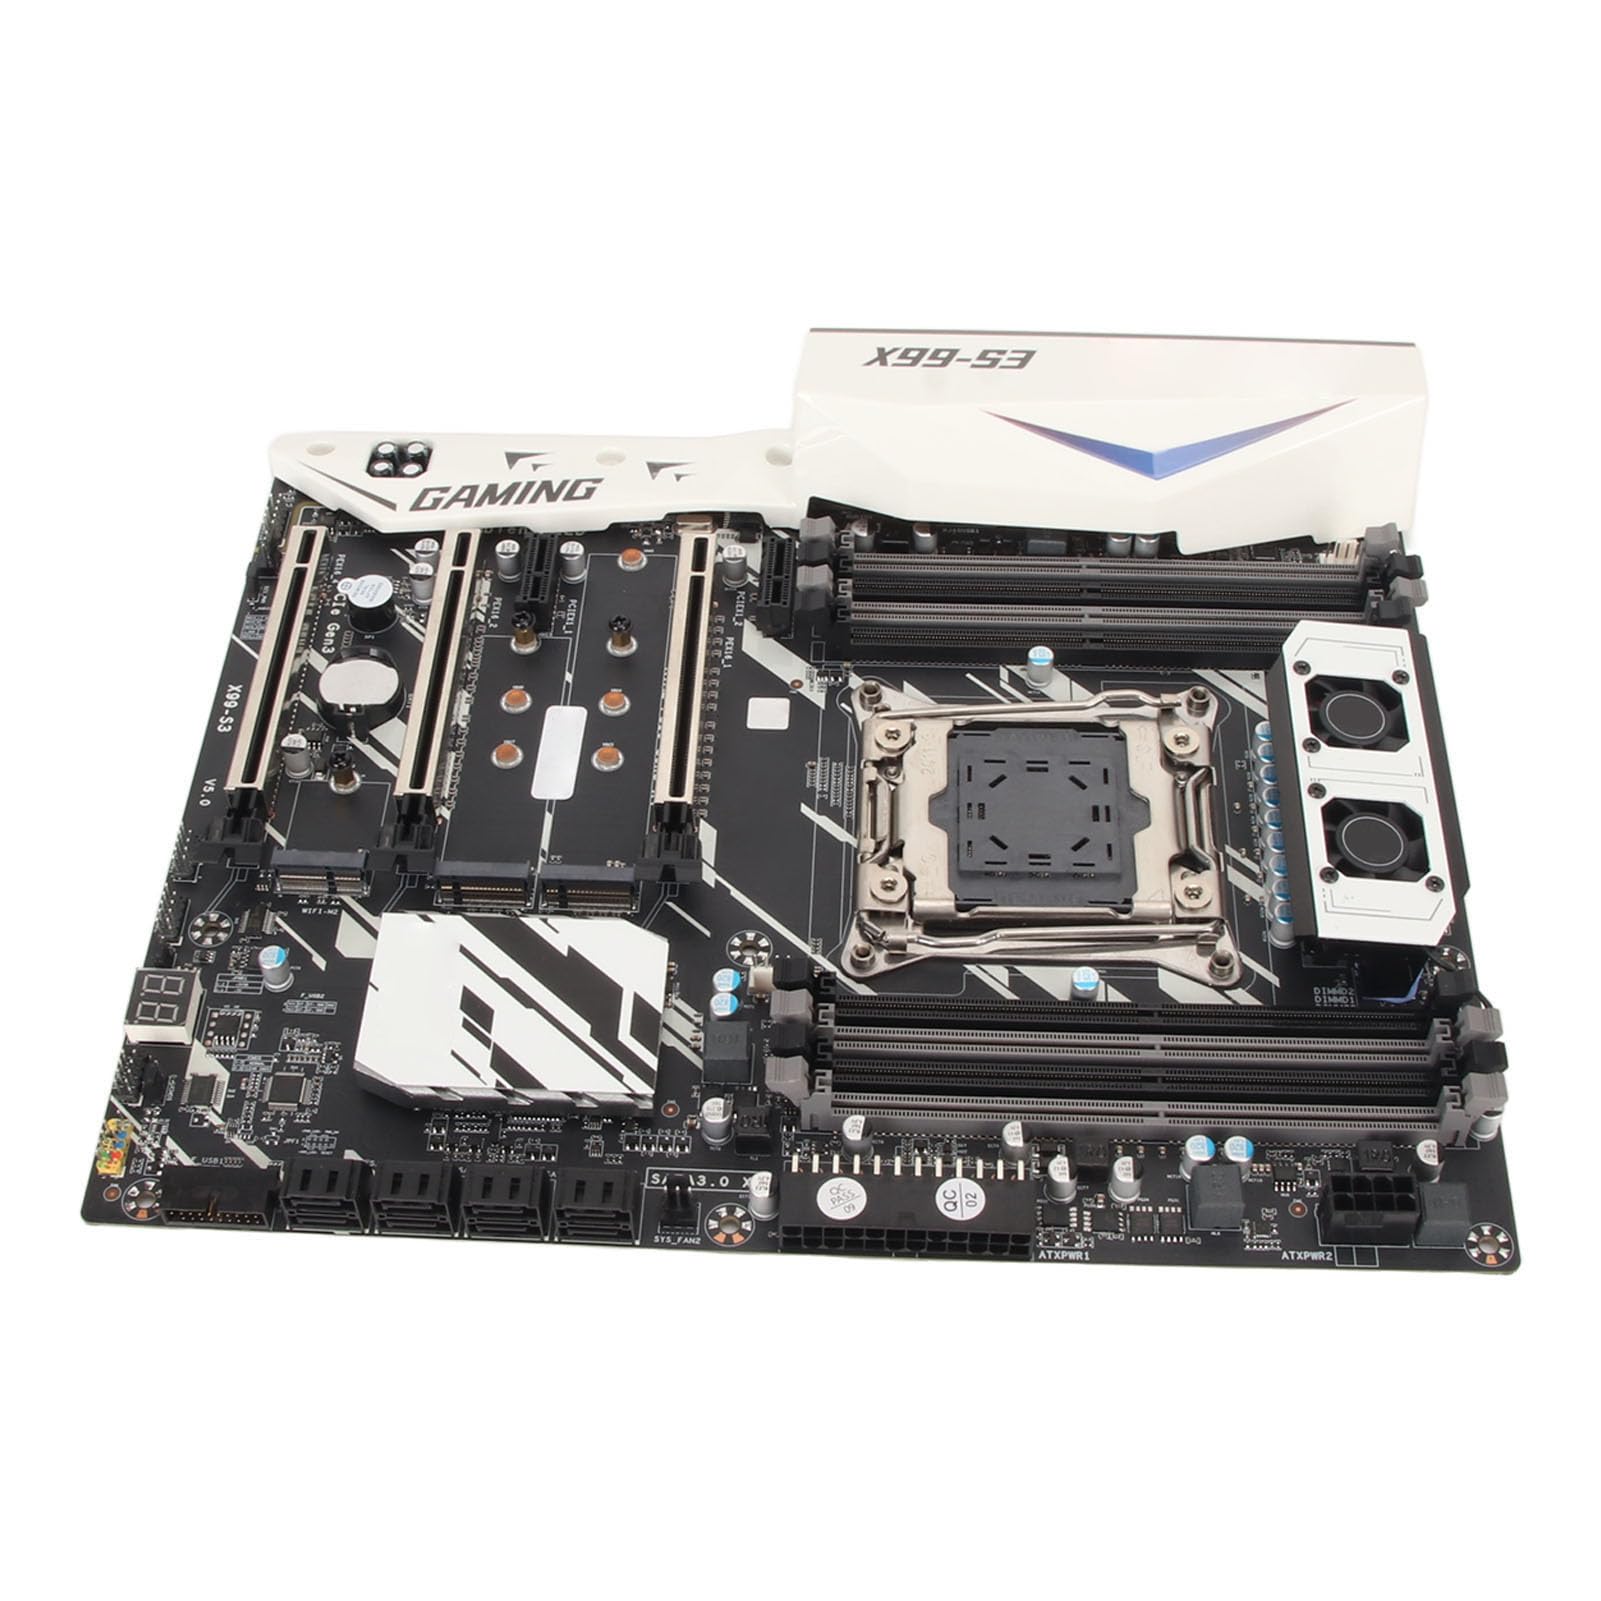 X99-S3 ATX Desktop Motherboard NVME M.2 SSD 4 Channel DDR4 WiFi Gaming Motherboard 256GB Expandable LGA2011 SATA3.0 Comput